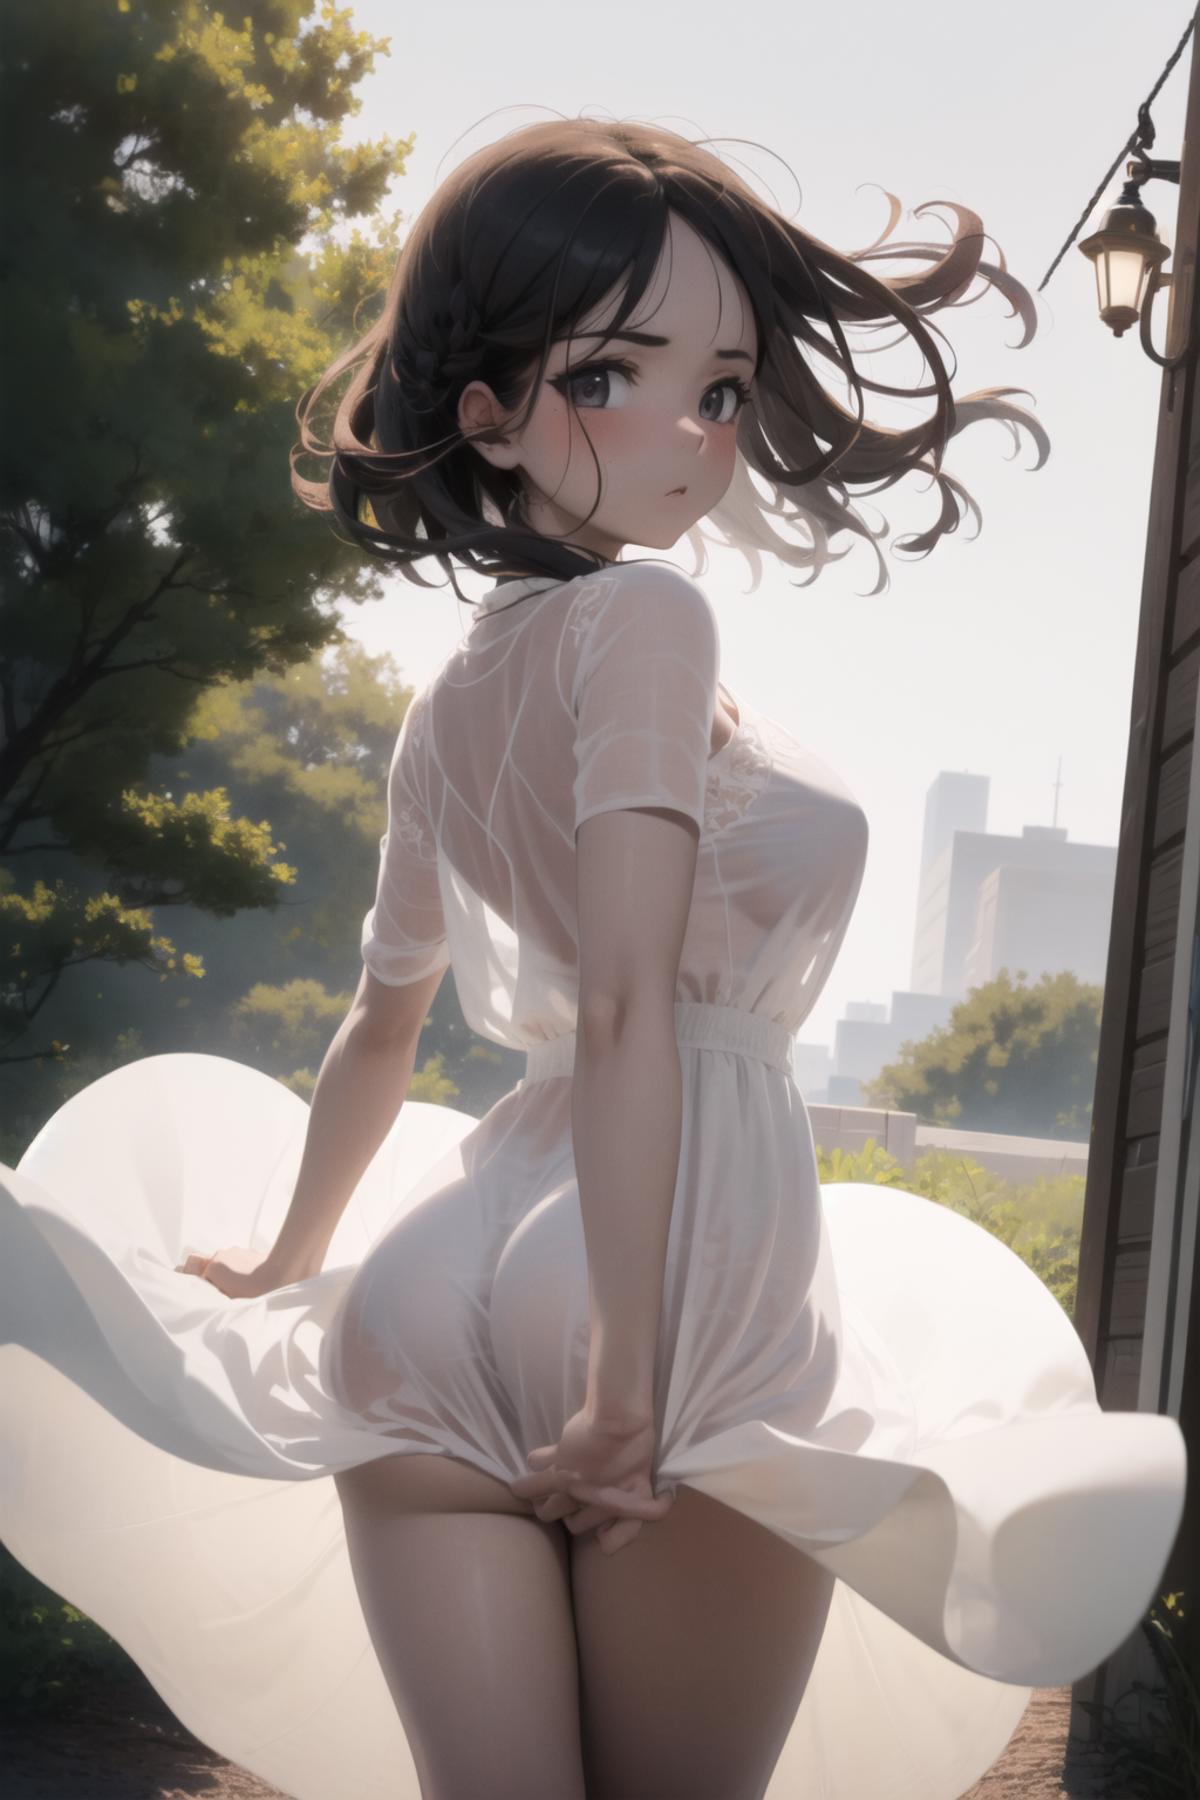 Anime girl in white dress with her back to the camera.